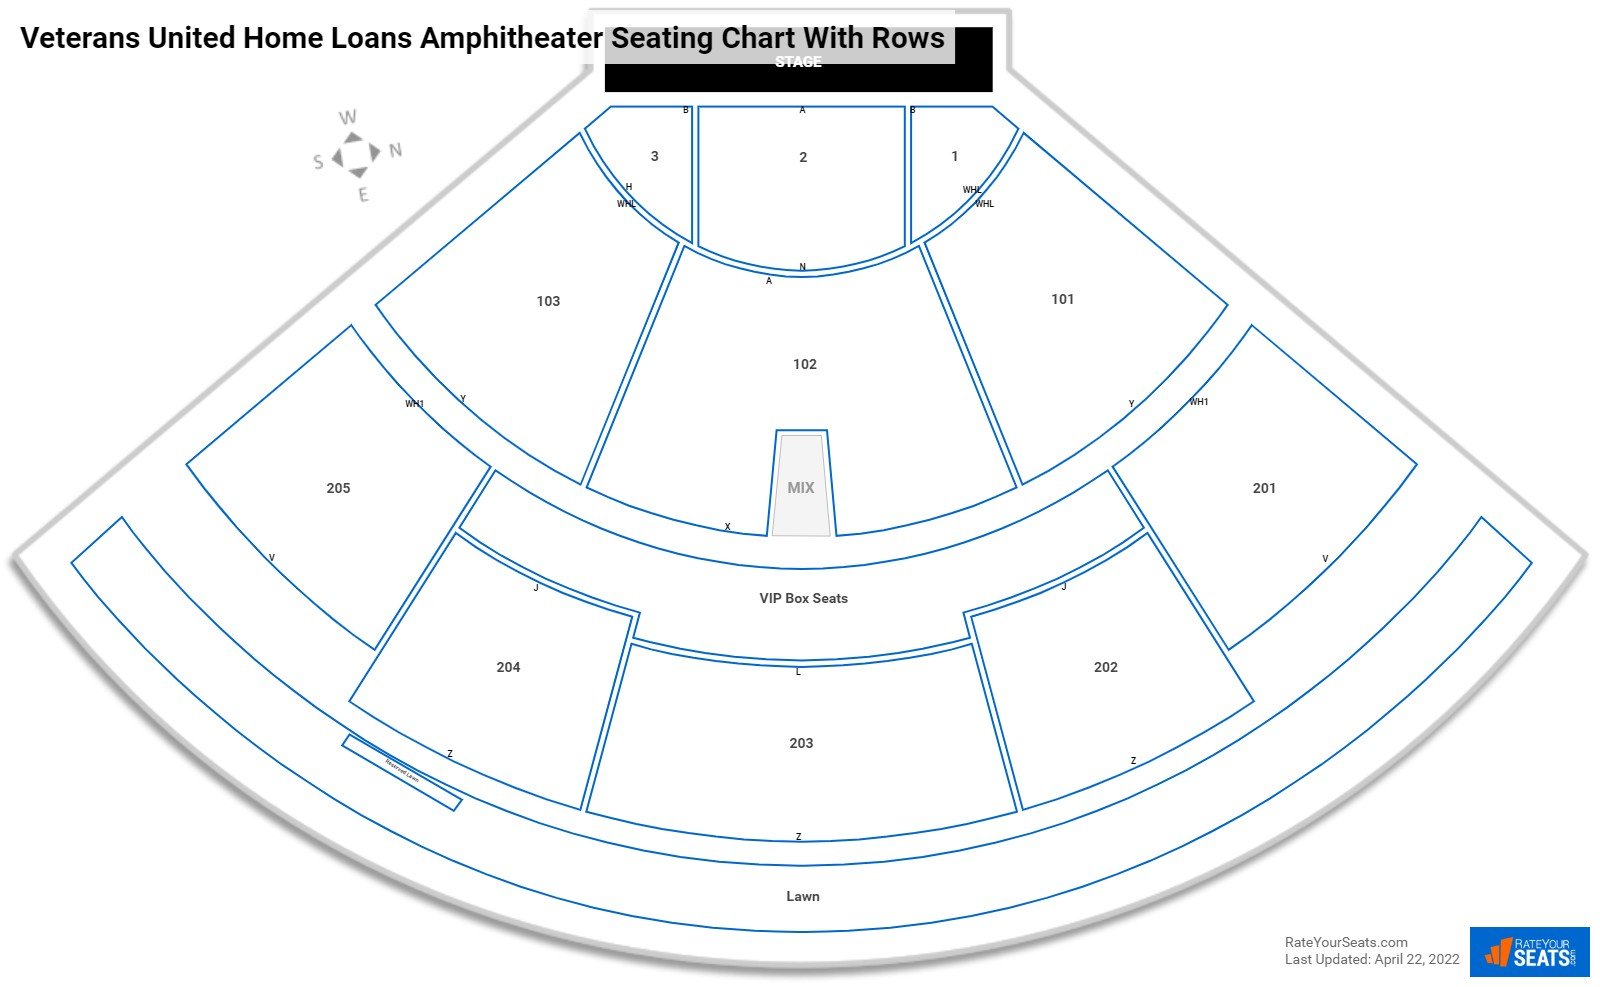 Veterans United Home Loans Amphitheater seating chart with row numbers